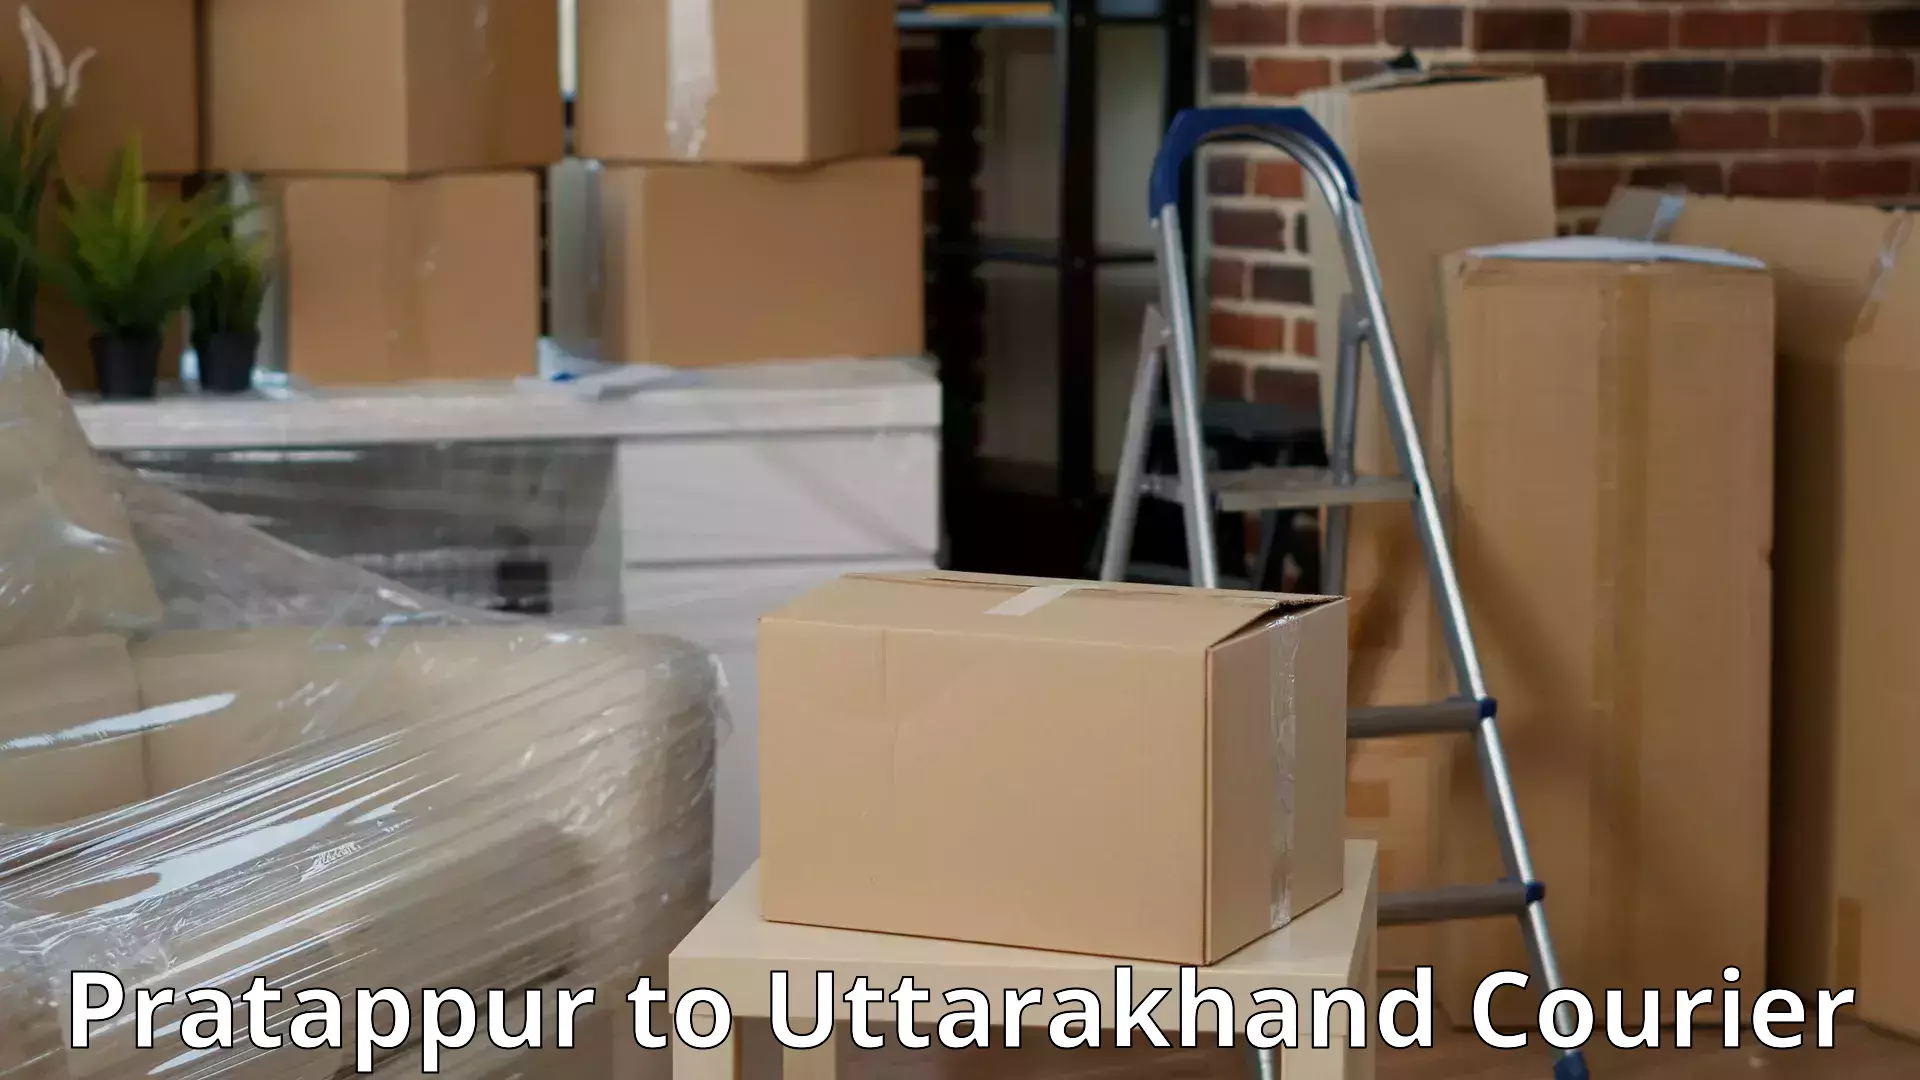 Furniture moving specialists in Pratappur to Rishikesh